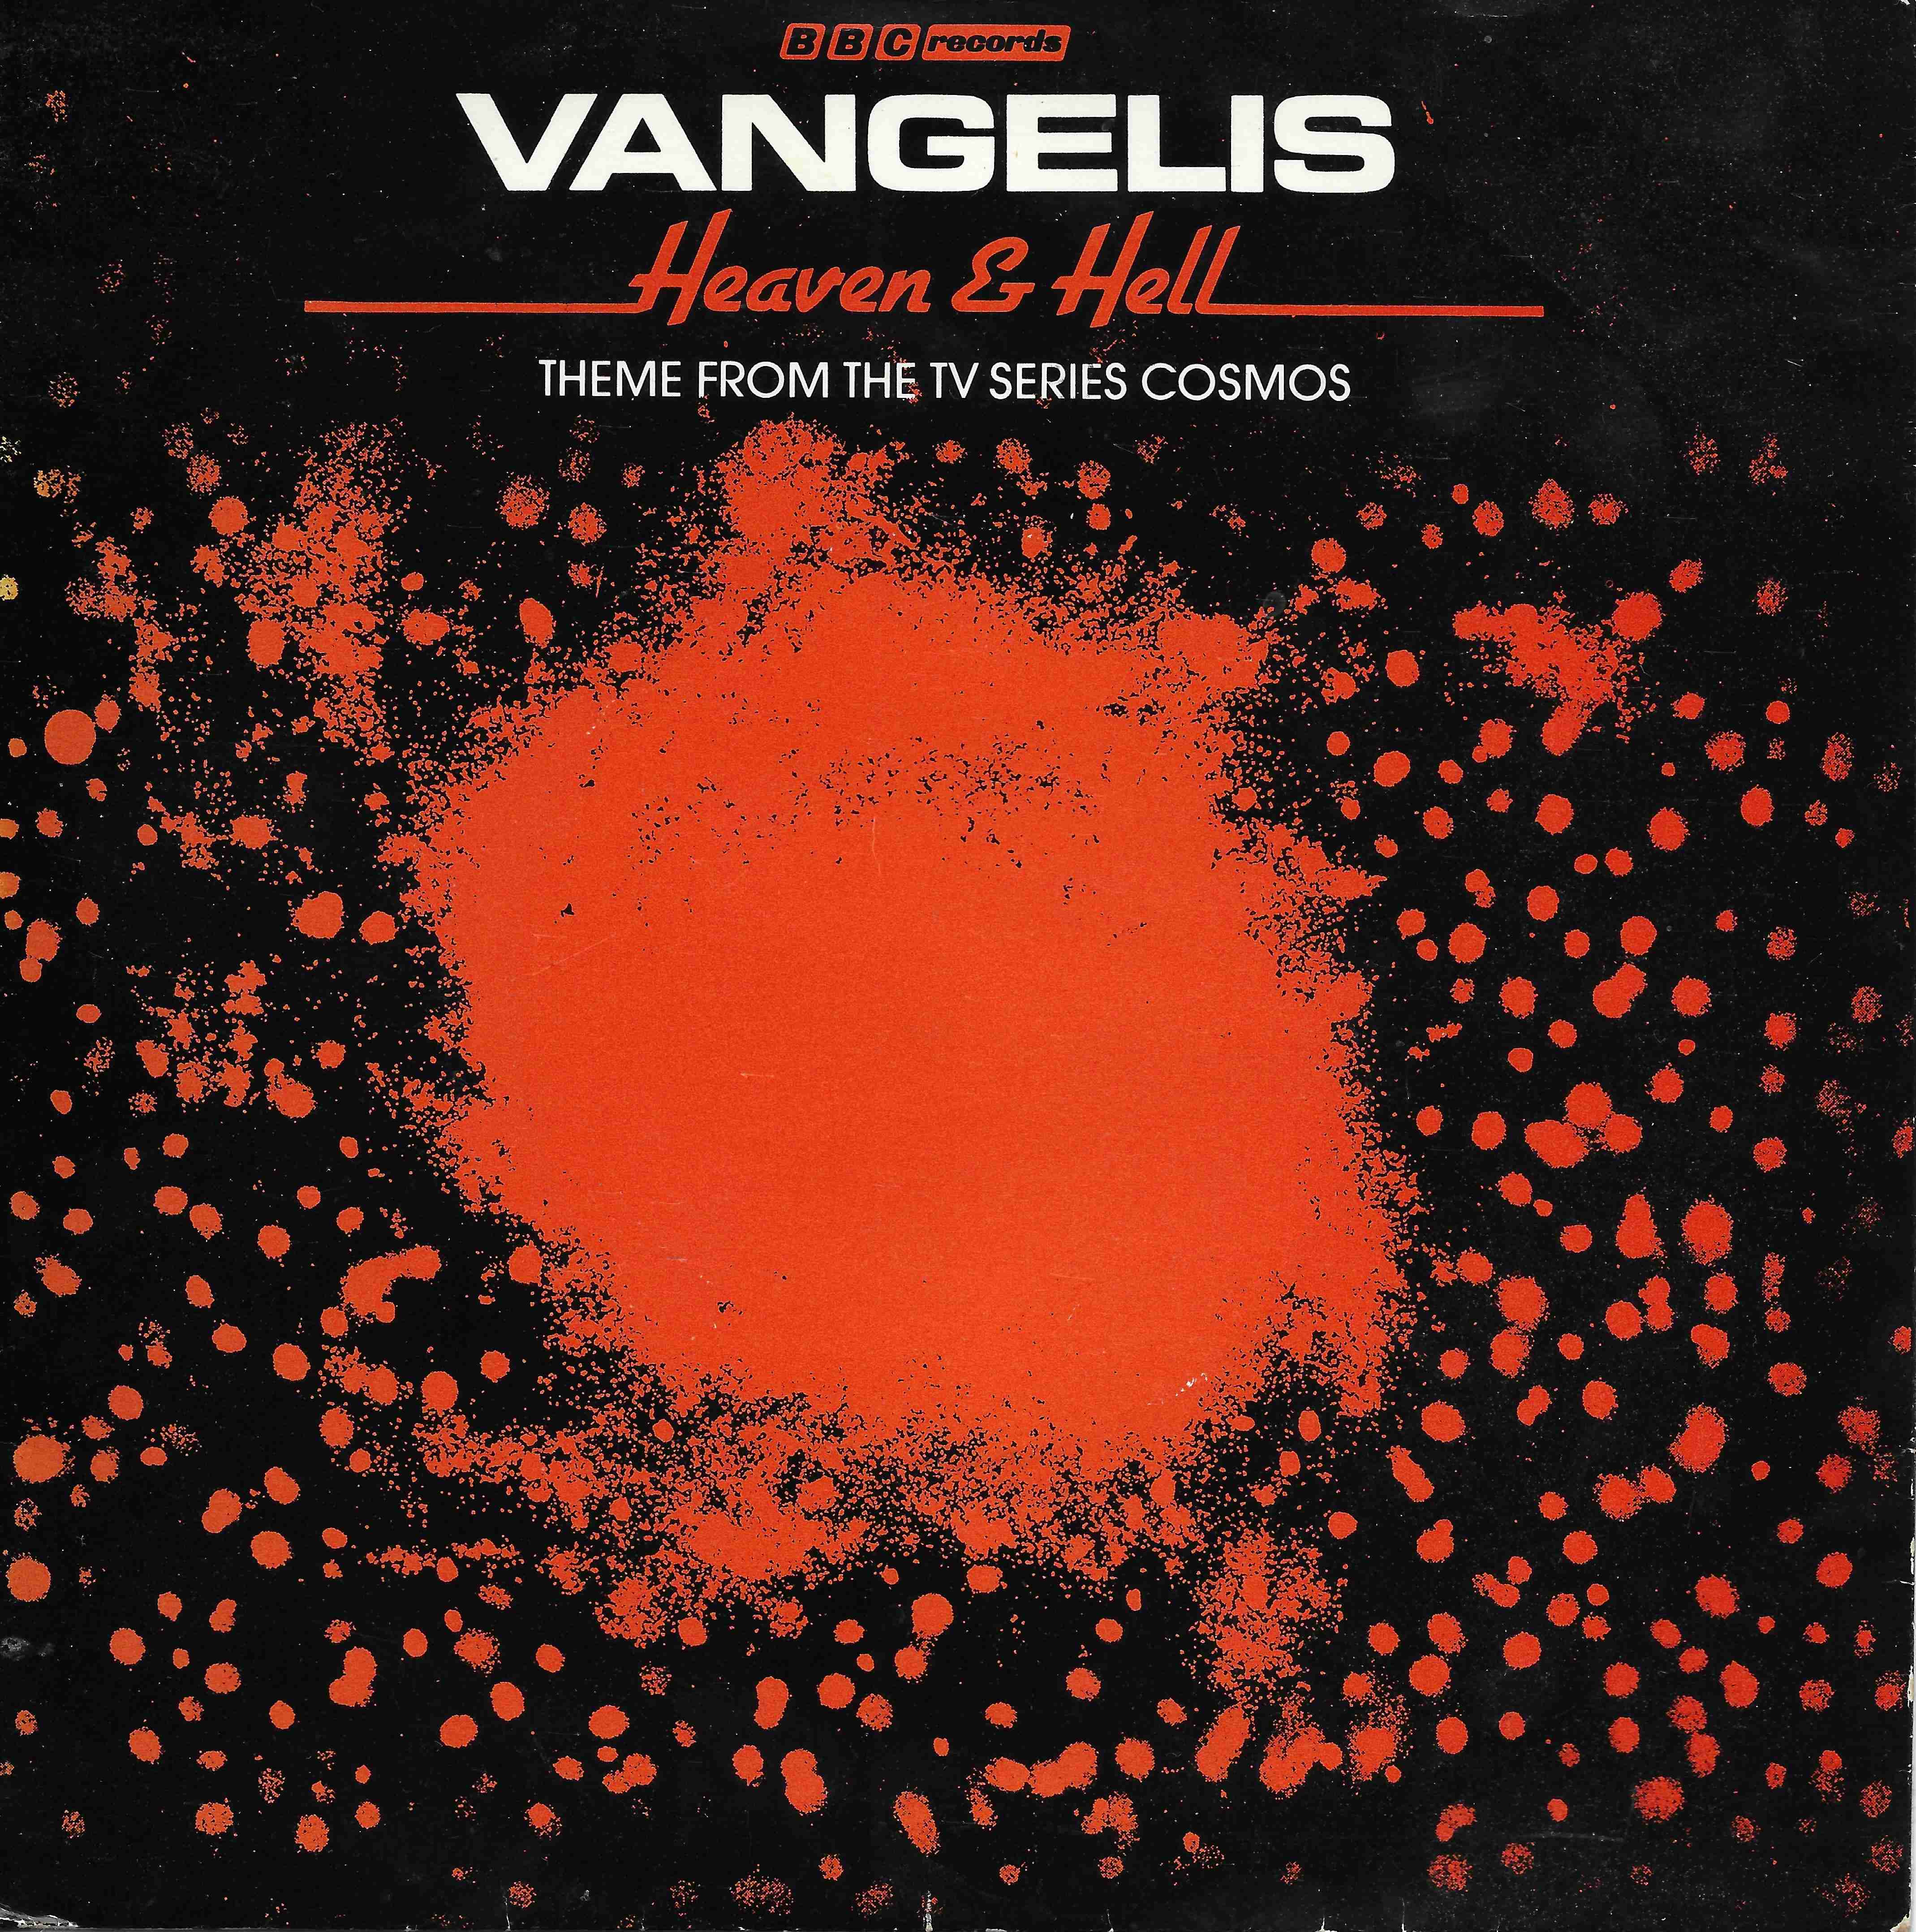 Picture of BBC 1 Heaven & Hell (Cosmos) by artist Vangelis from the BBC singles - Records and Tapes library